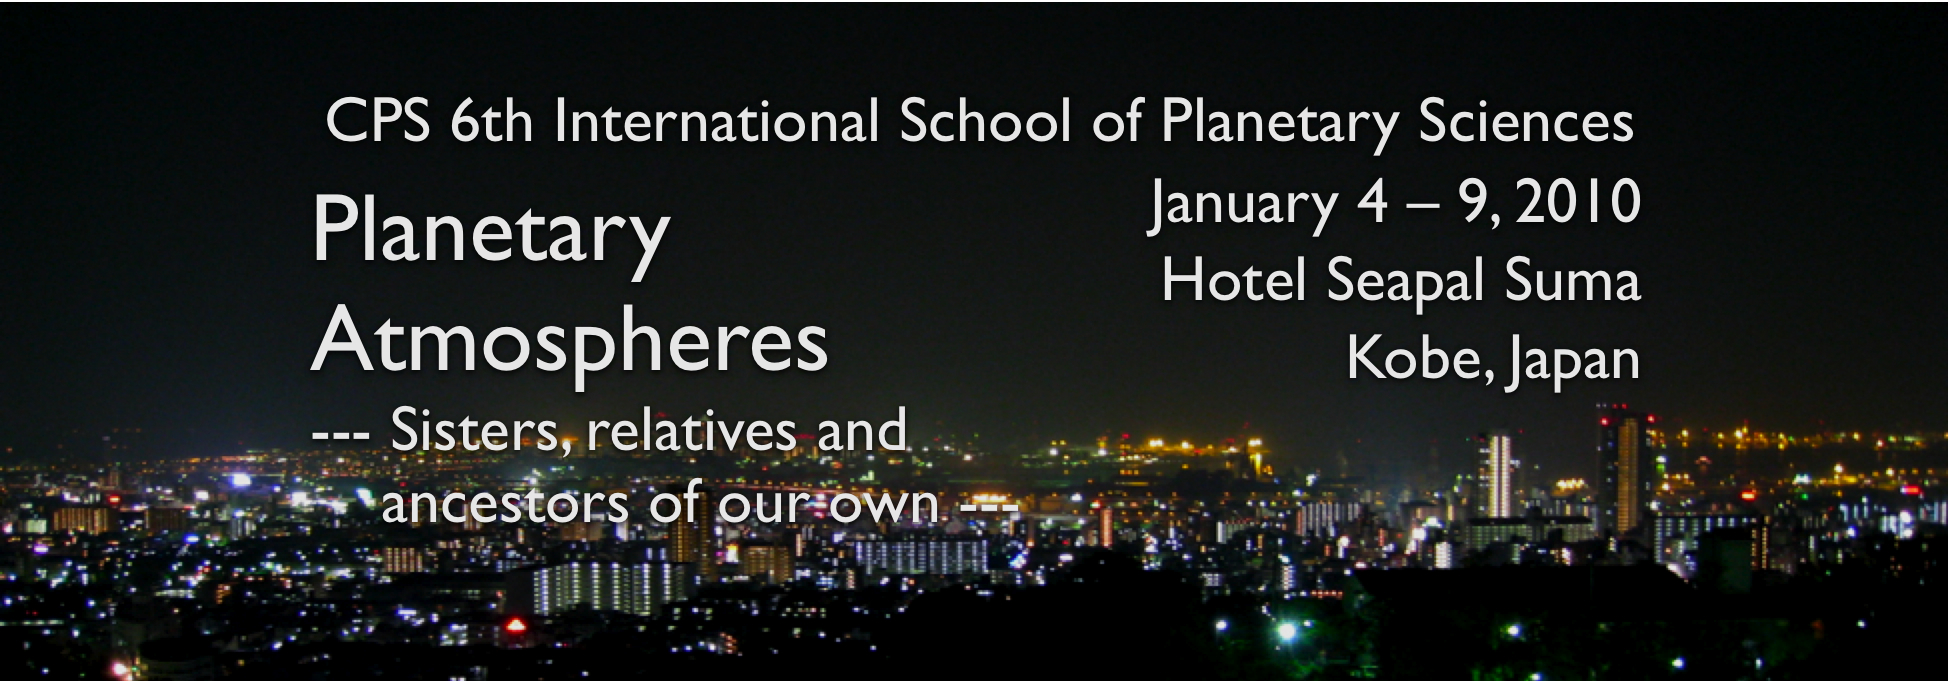 CPS 6th International School of Planetary Sciences